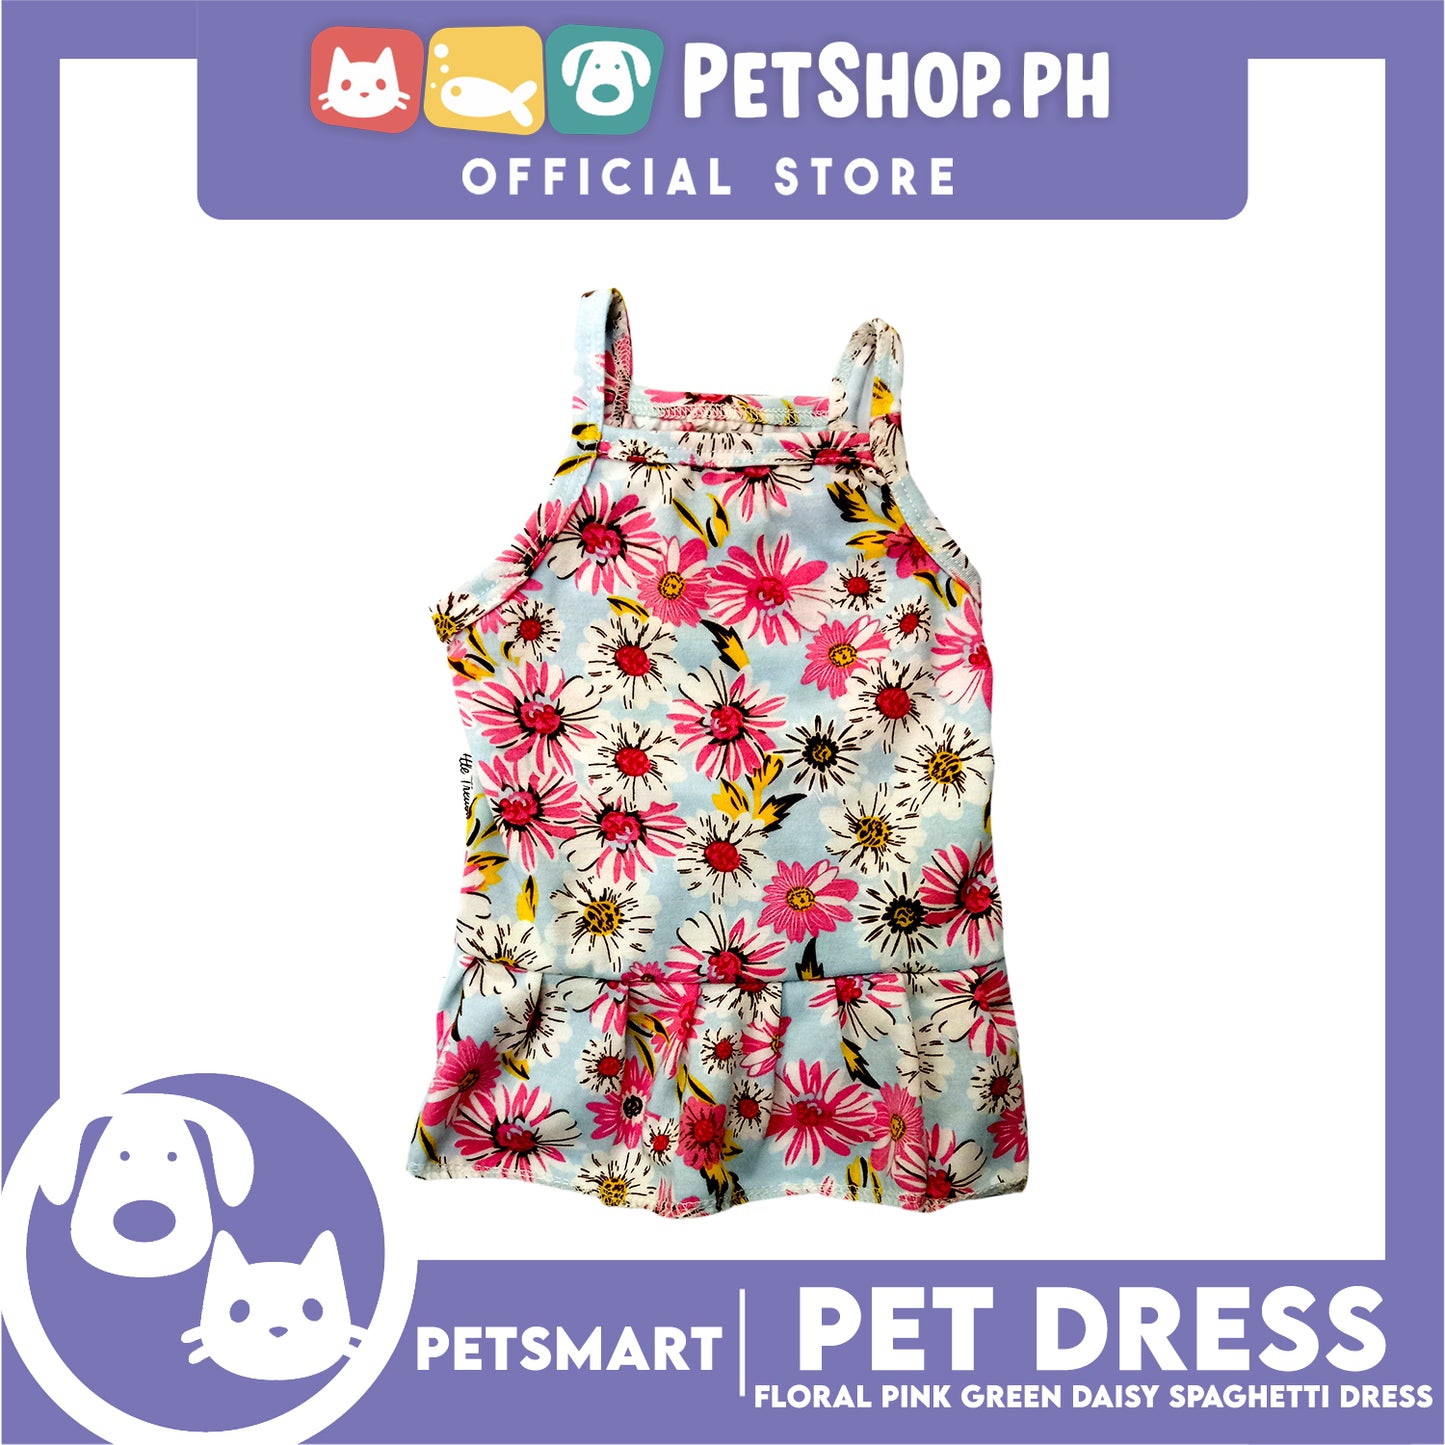 Pet Dress Floral Design, Pink Green Color Daisy Spaghetti Dress (Small) Perfect Fit for Dogs and Cats